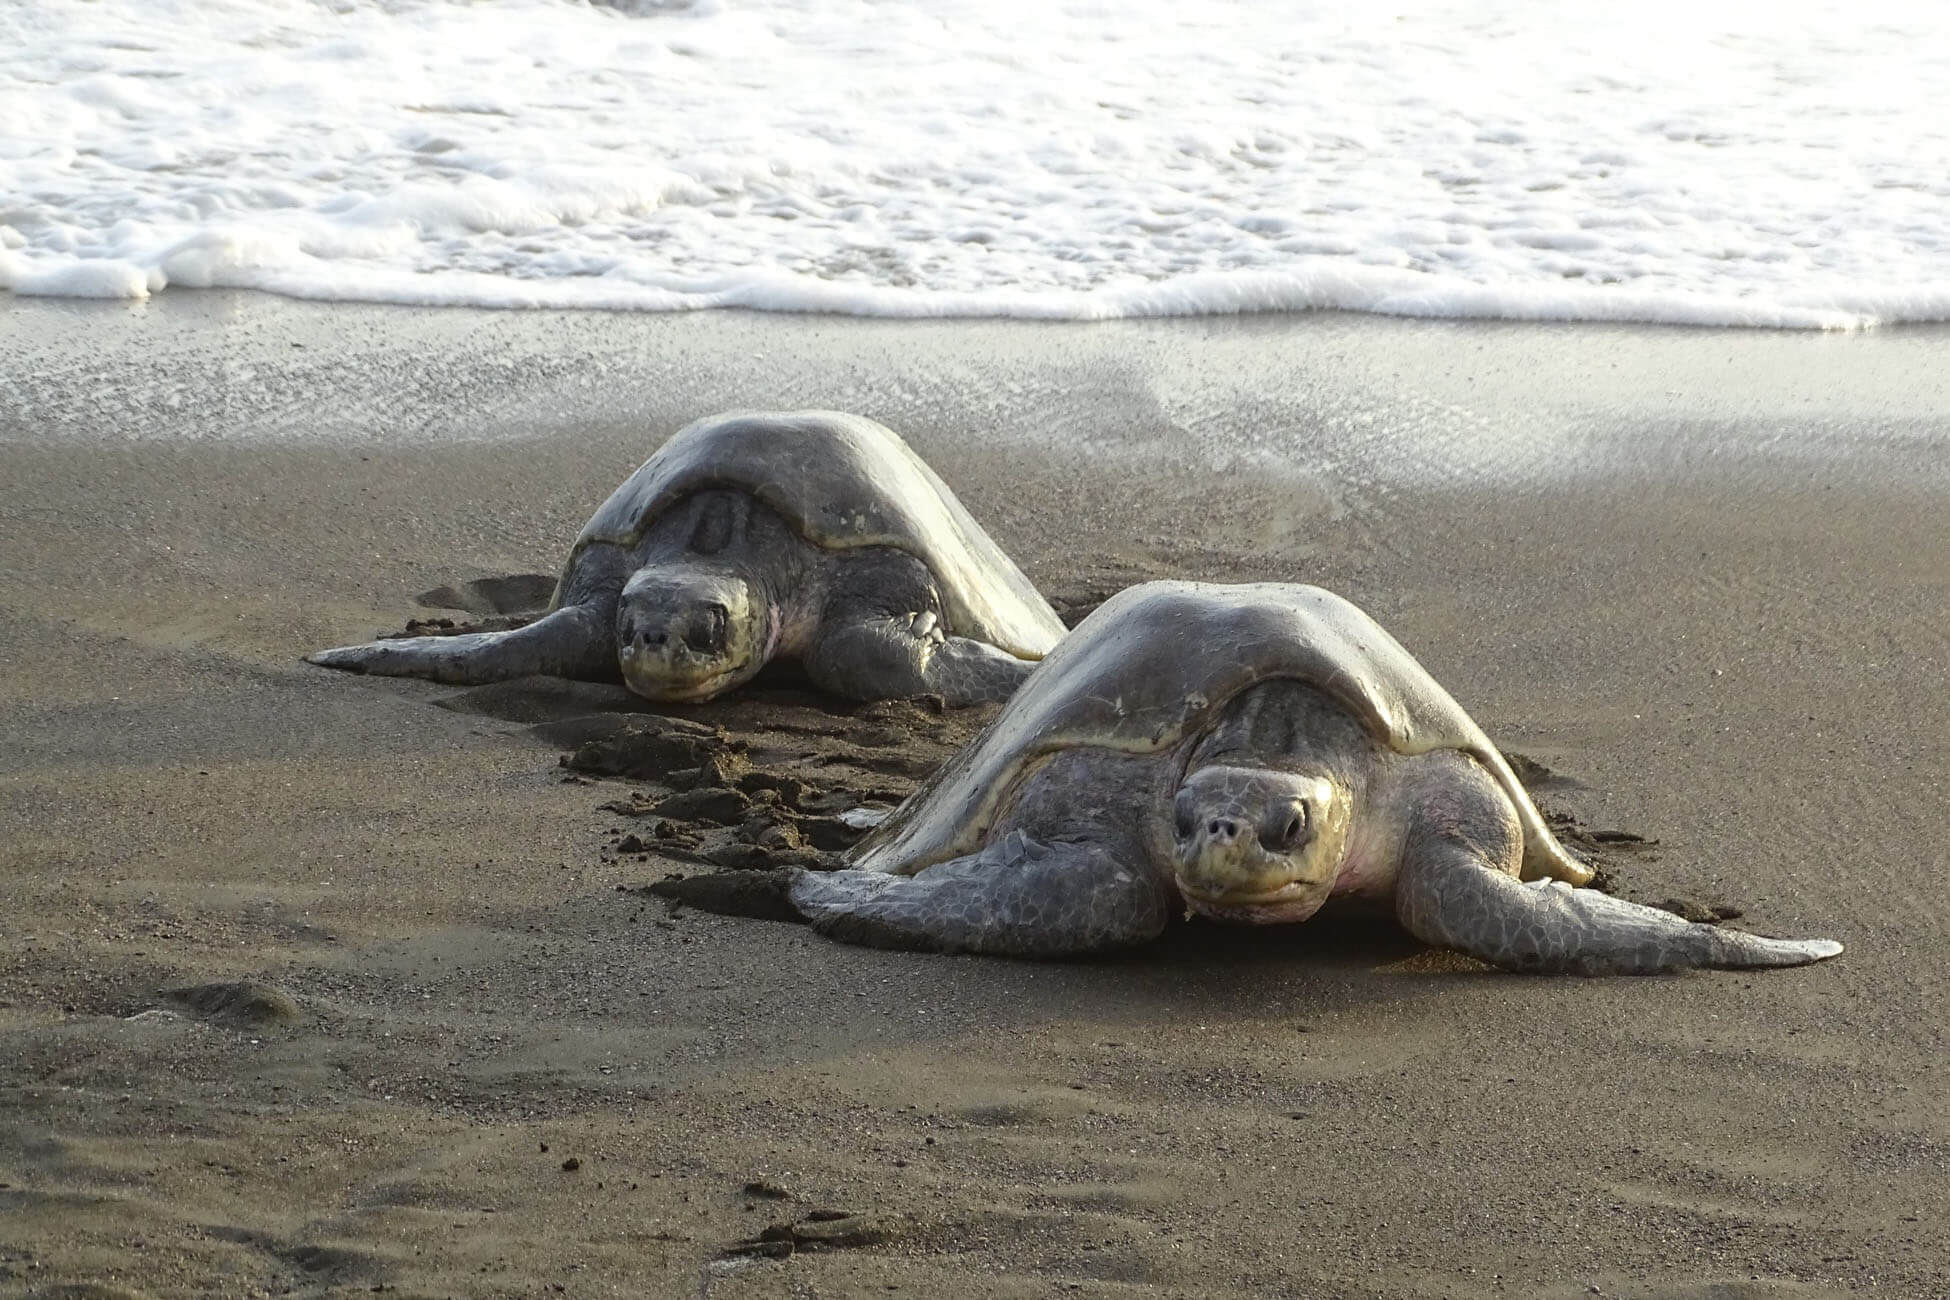 Sea Turtles on the beach from Sea Turtle Preservation Society